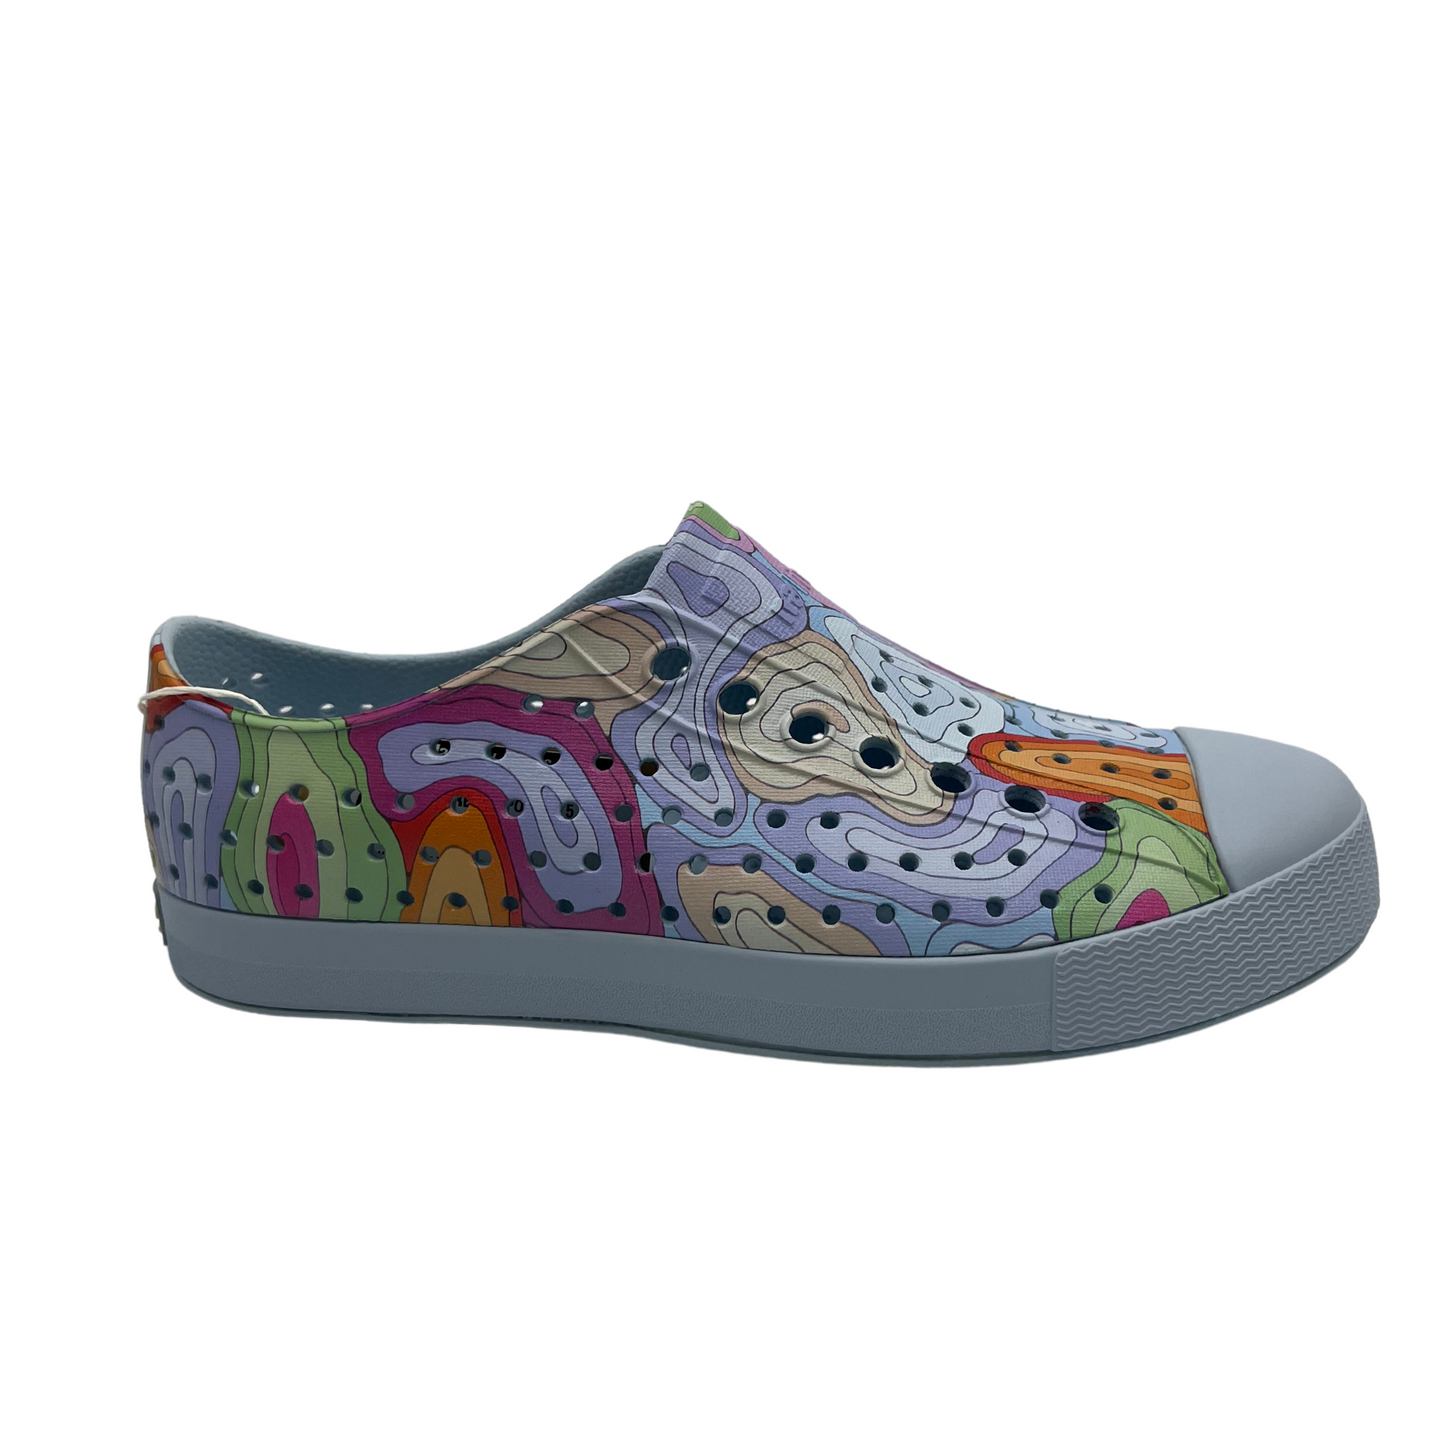 Right facing view of colourful EVA slip on shoes with rounded toe and perforated upper